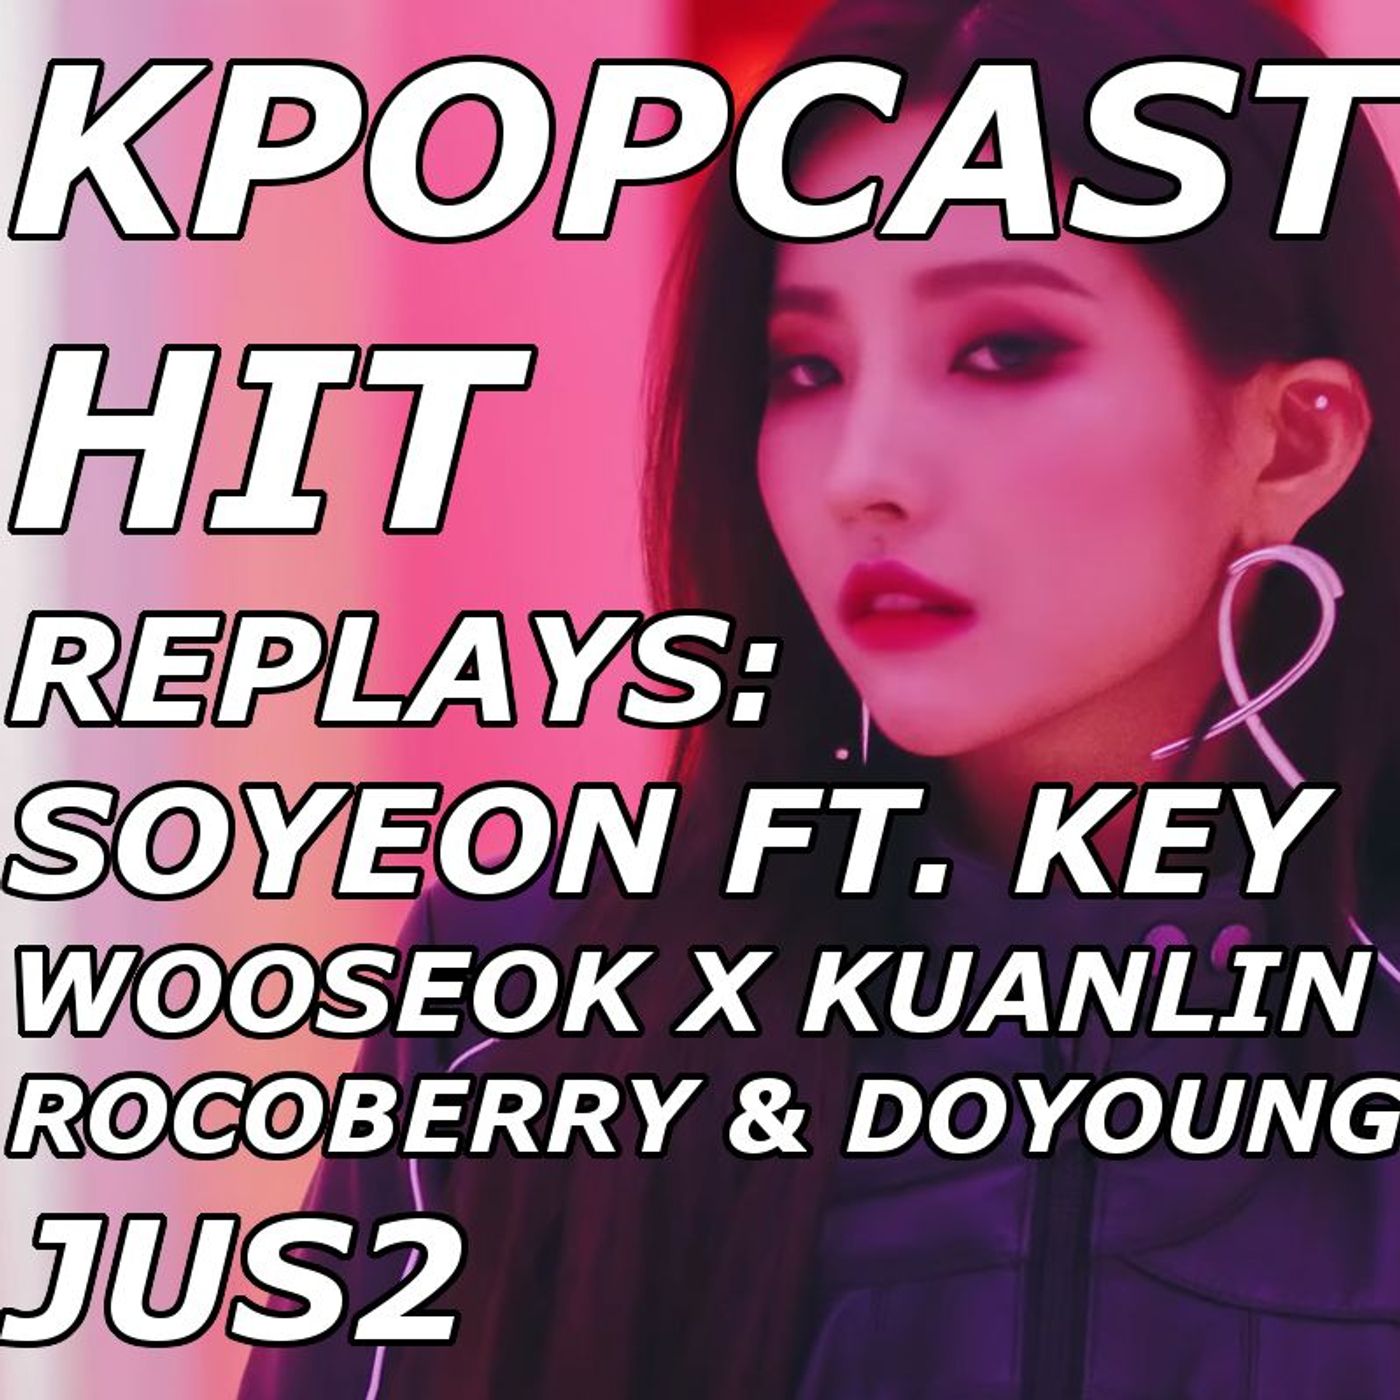 Hit Replays: SOYEON (ft KEY), WOOSEOK X KUANLIN, Jus2, ROCOBERRY & DOYOUNG W2 March 2019